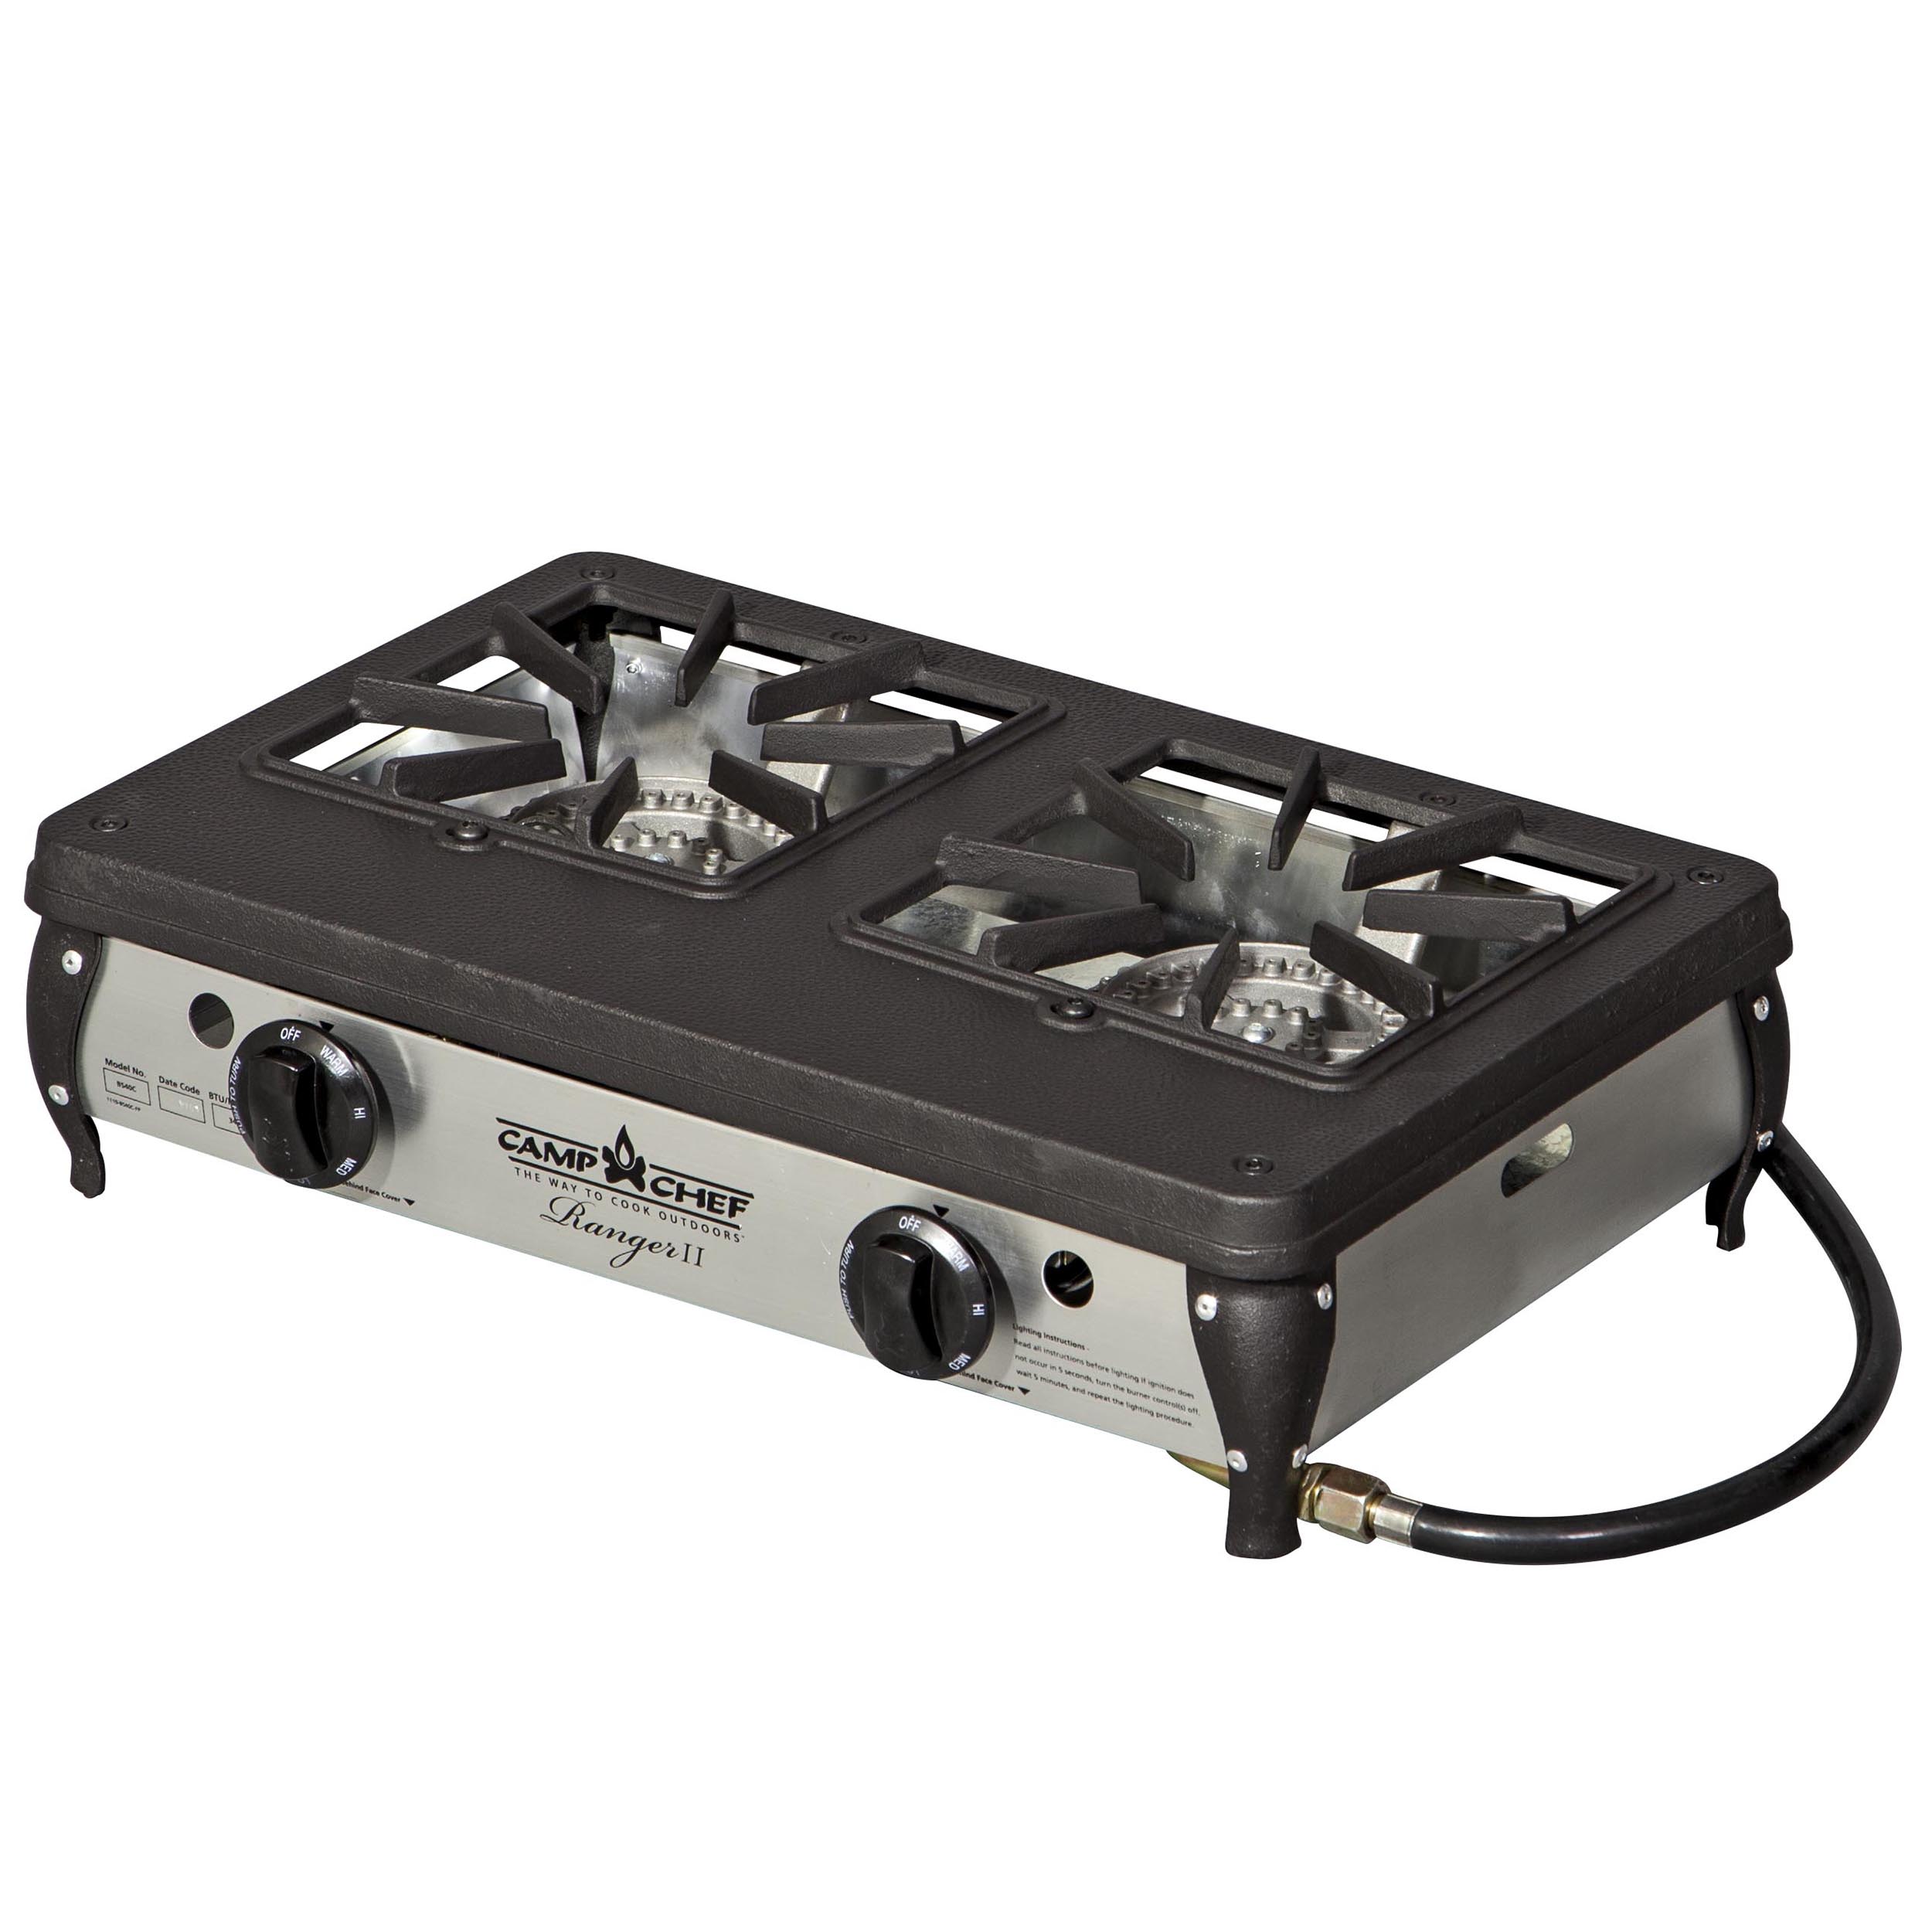 Camp Chef Ranger II Portable Outdoor 2 Burner Propane Stove, 34,000 BTU  Total Output, 128 Sq Inch Cooking Area, BS40C